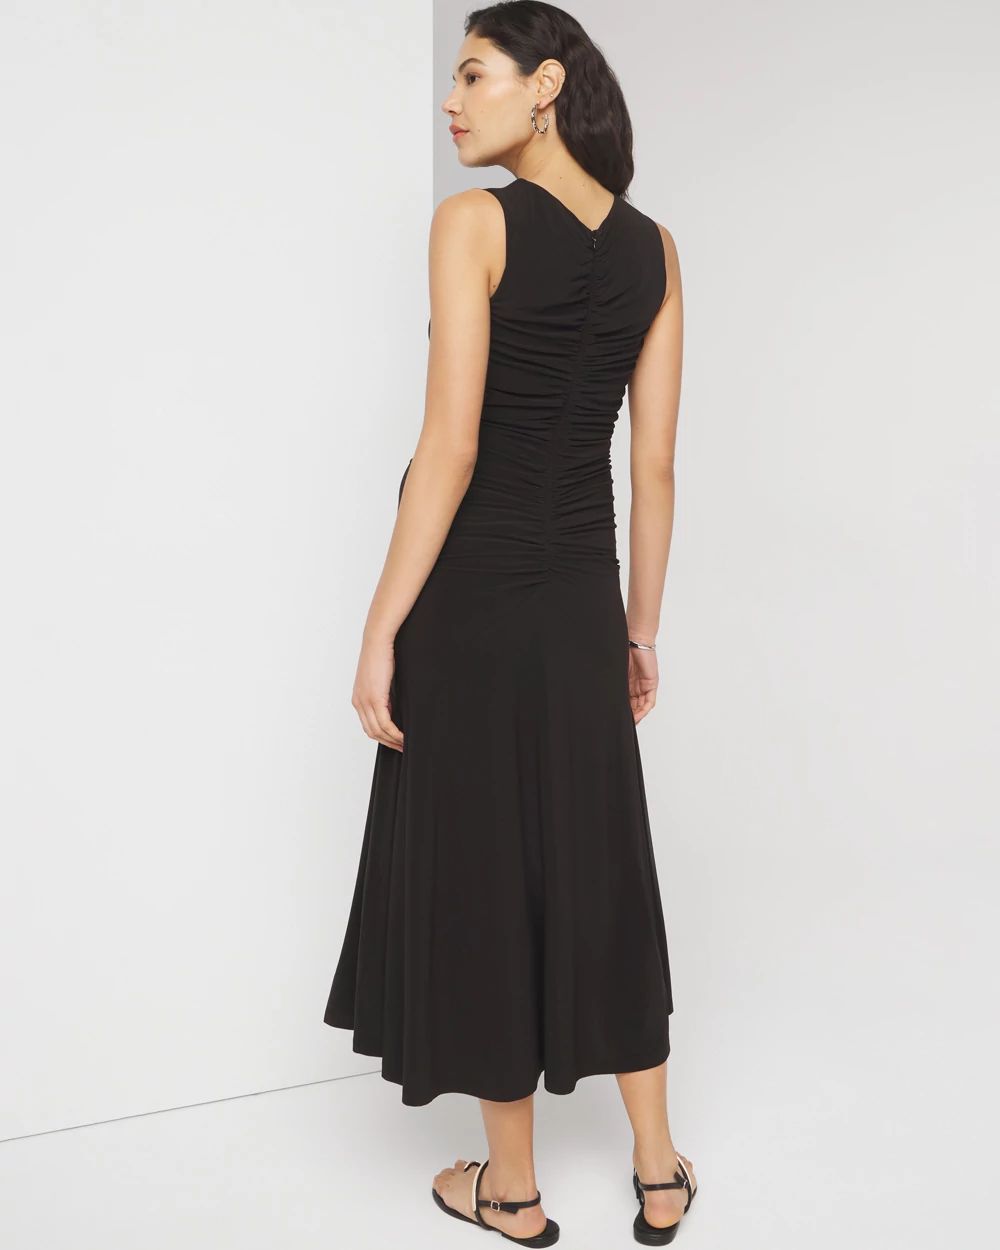 Sleeveless Matte Jersey Ruched Keyhole Maxi Dress click to view larger image.